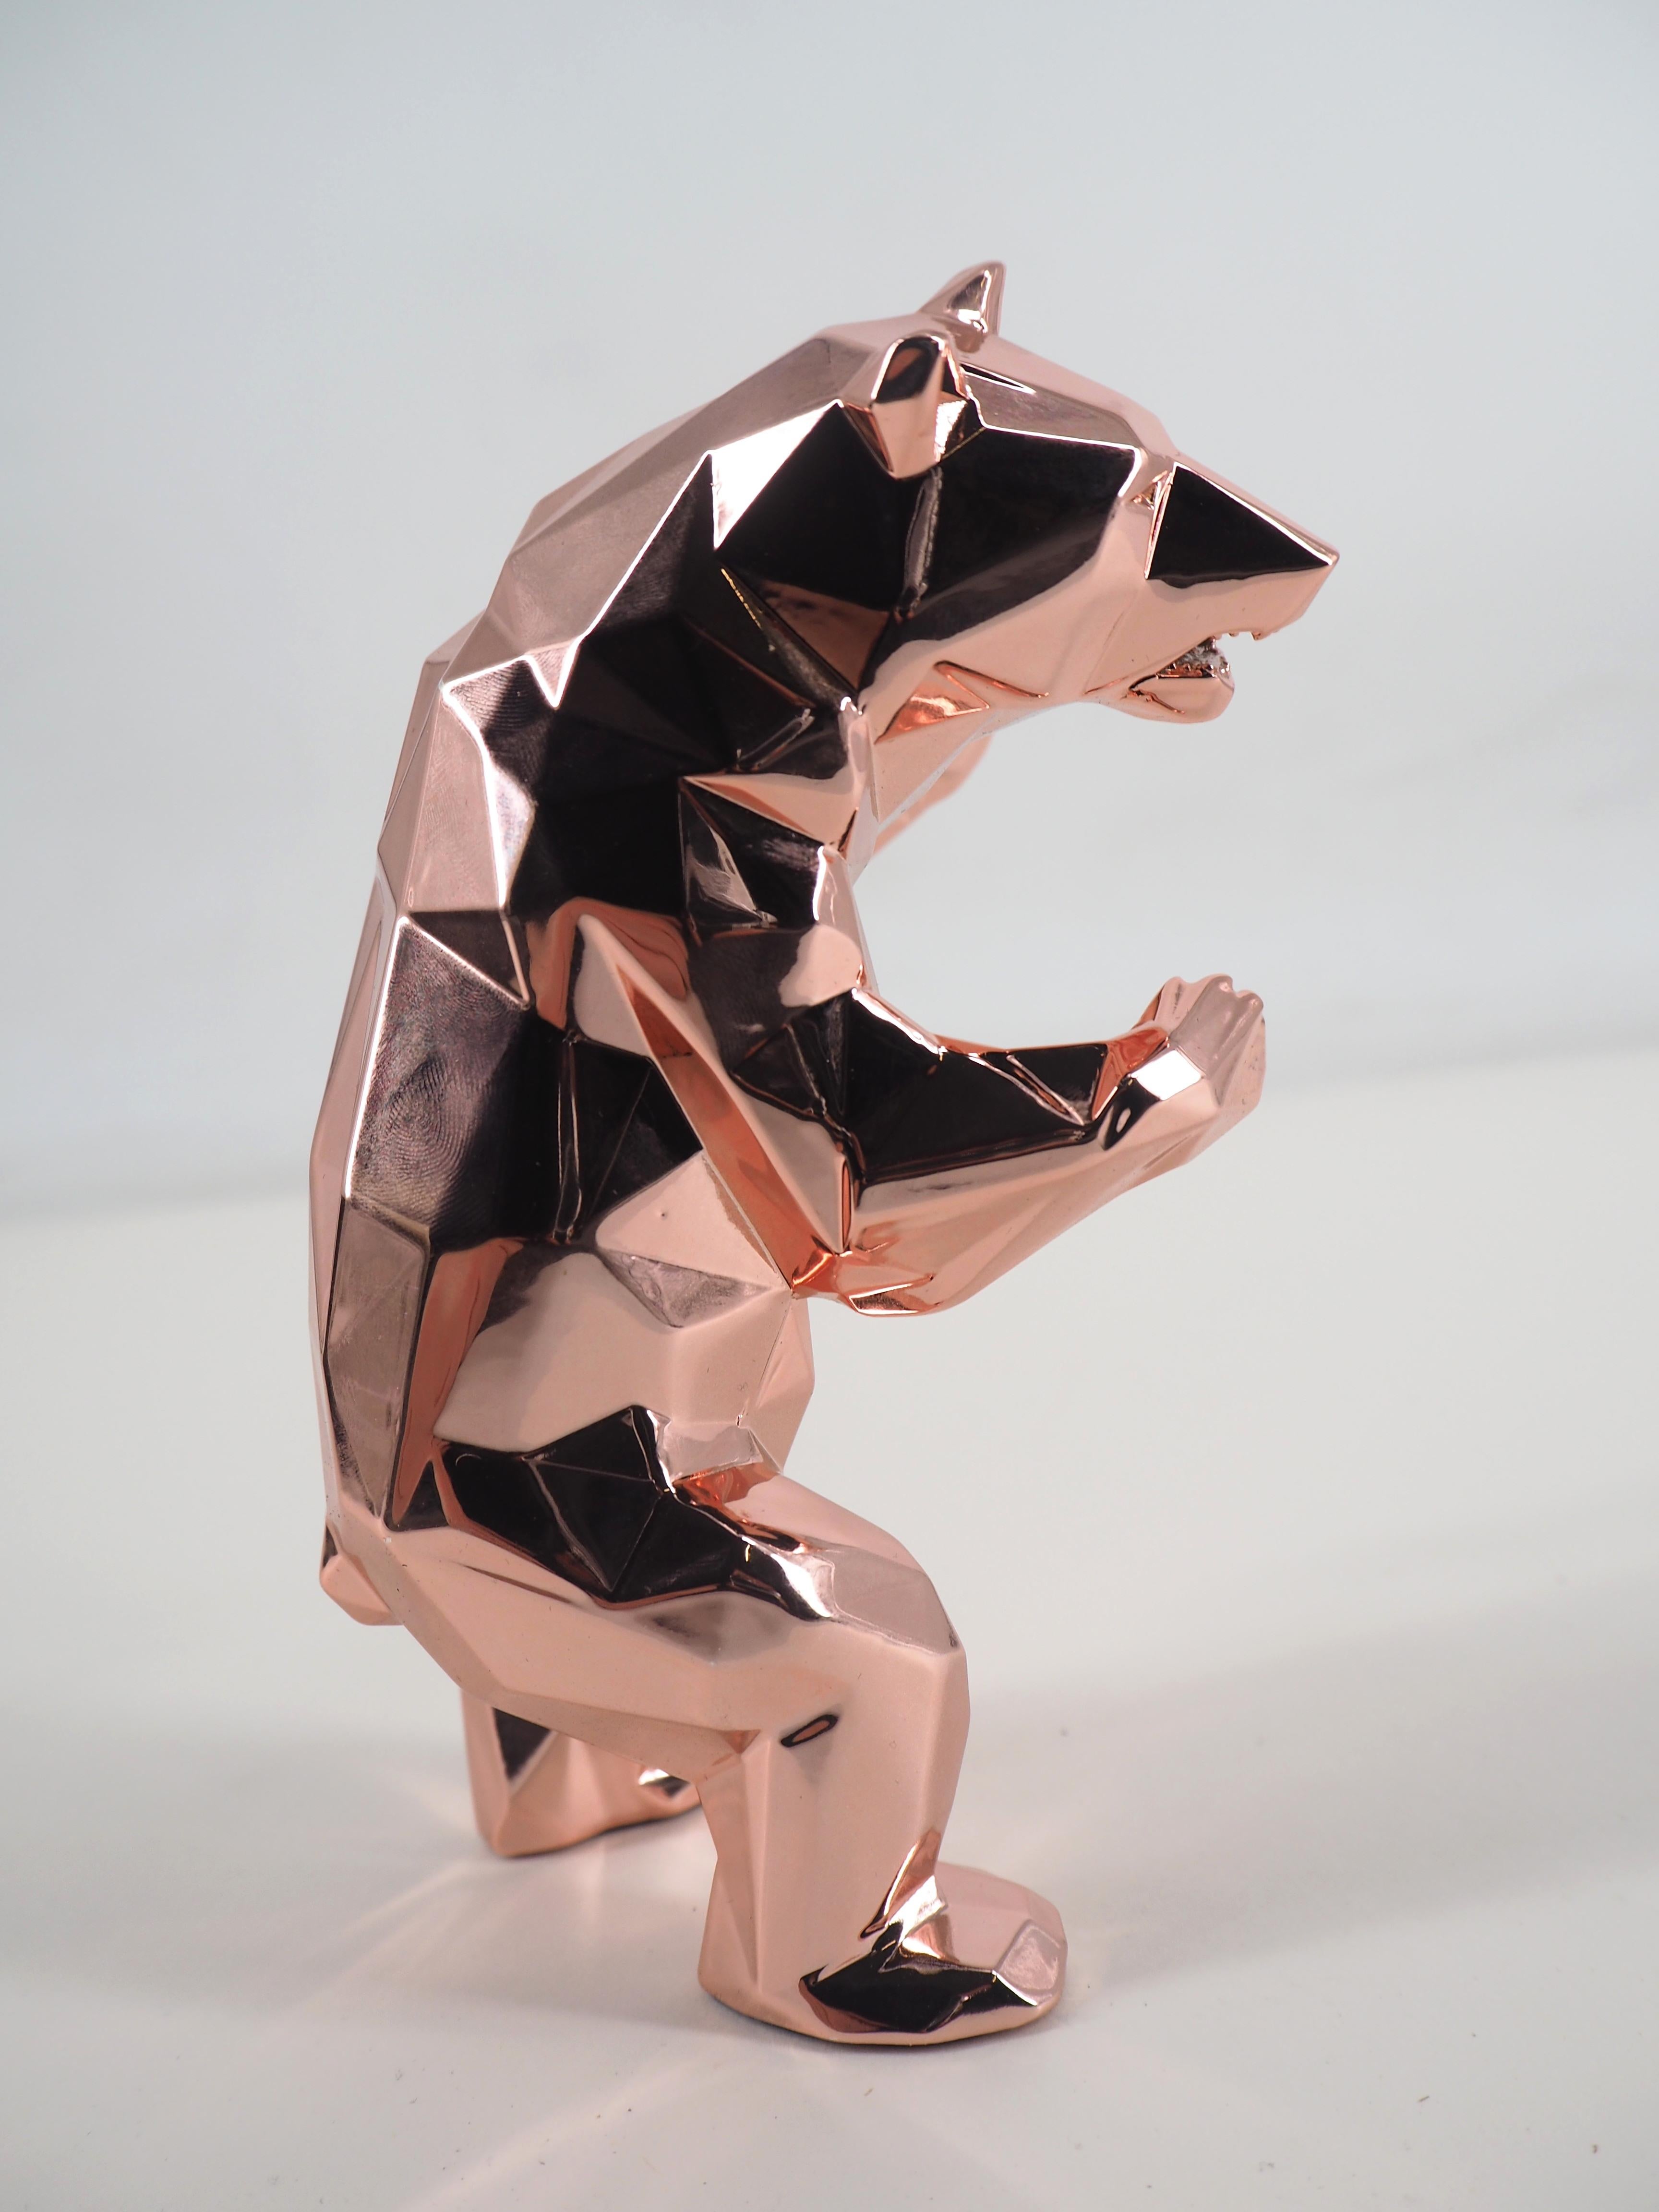 Richard ORLINSKI
StandingBear (Gold Pink)

Sculpture in resin
Gold Pink edition
About 13 x 8 cm (c. 5.1 x 3.1 in)
Presented in original box with certificate

Excellent condition